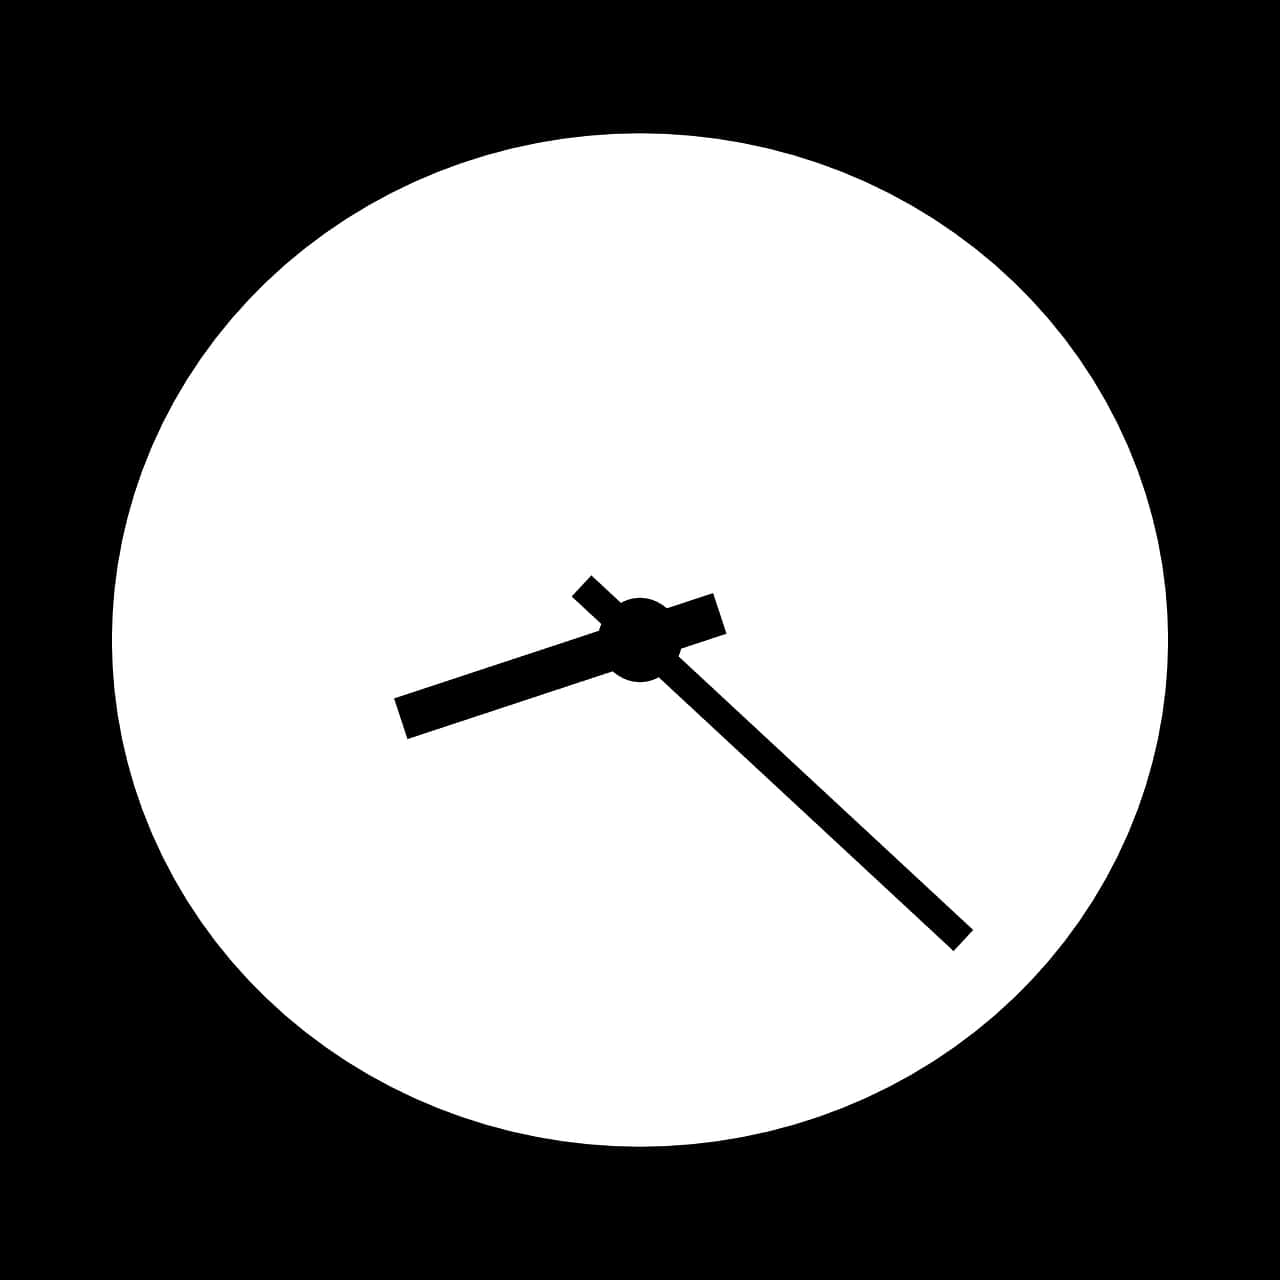 Minimalist Clock Face Graphic PNG